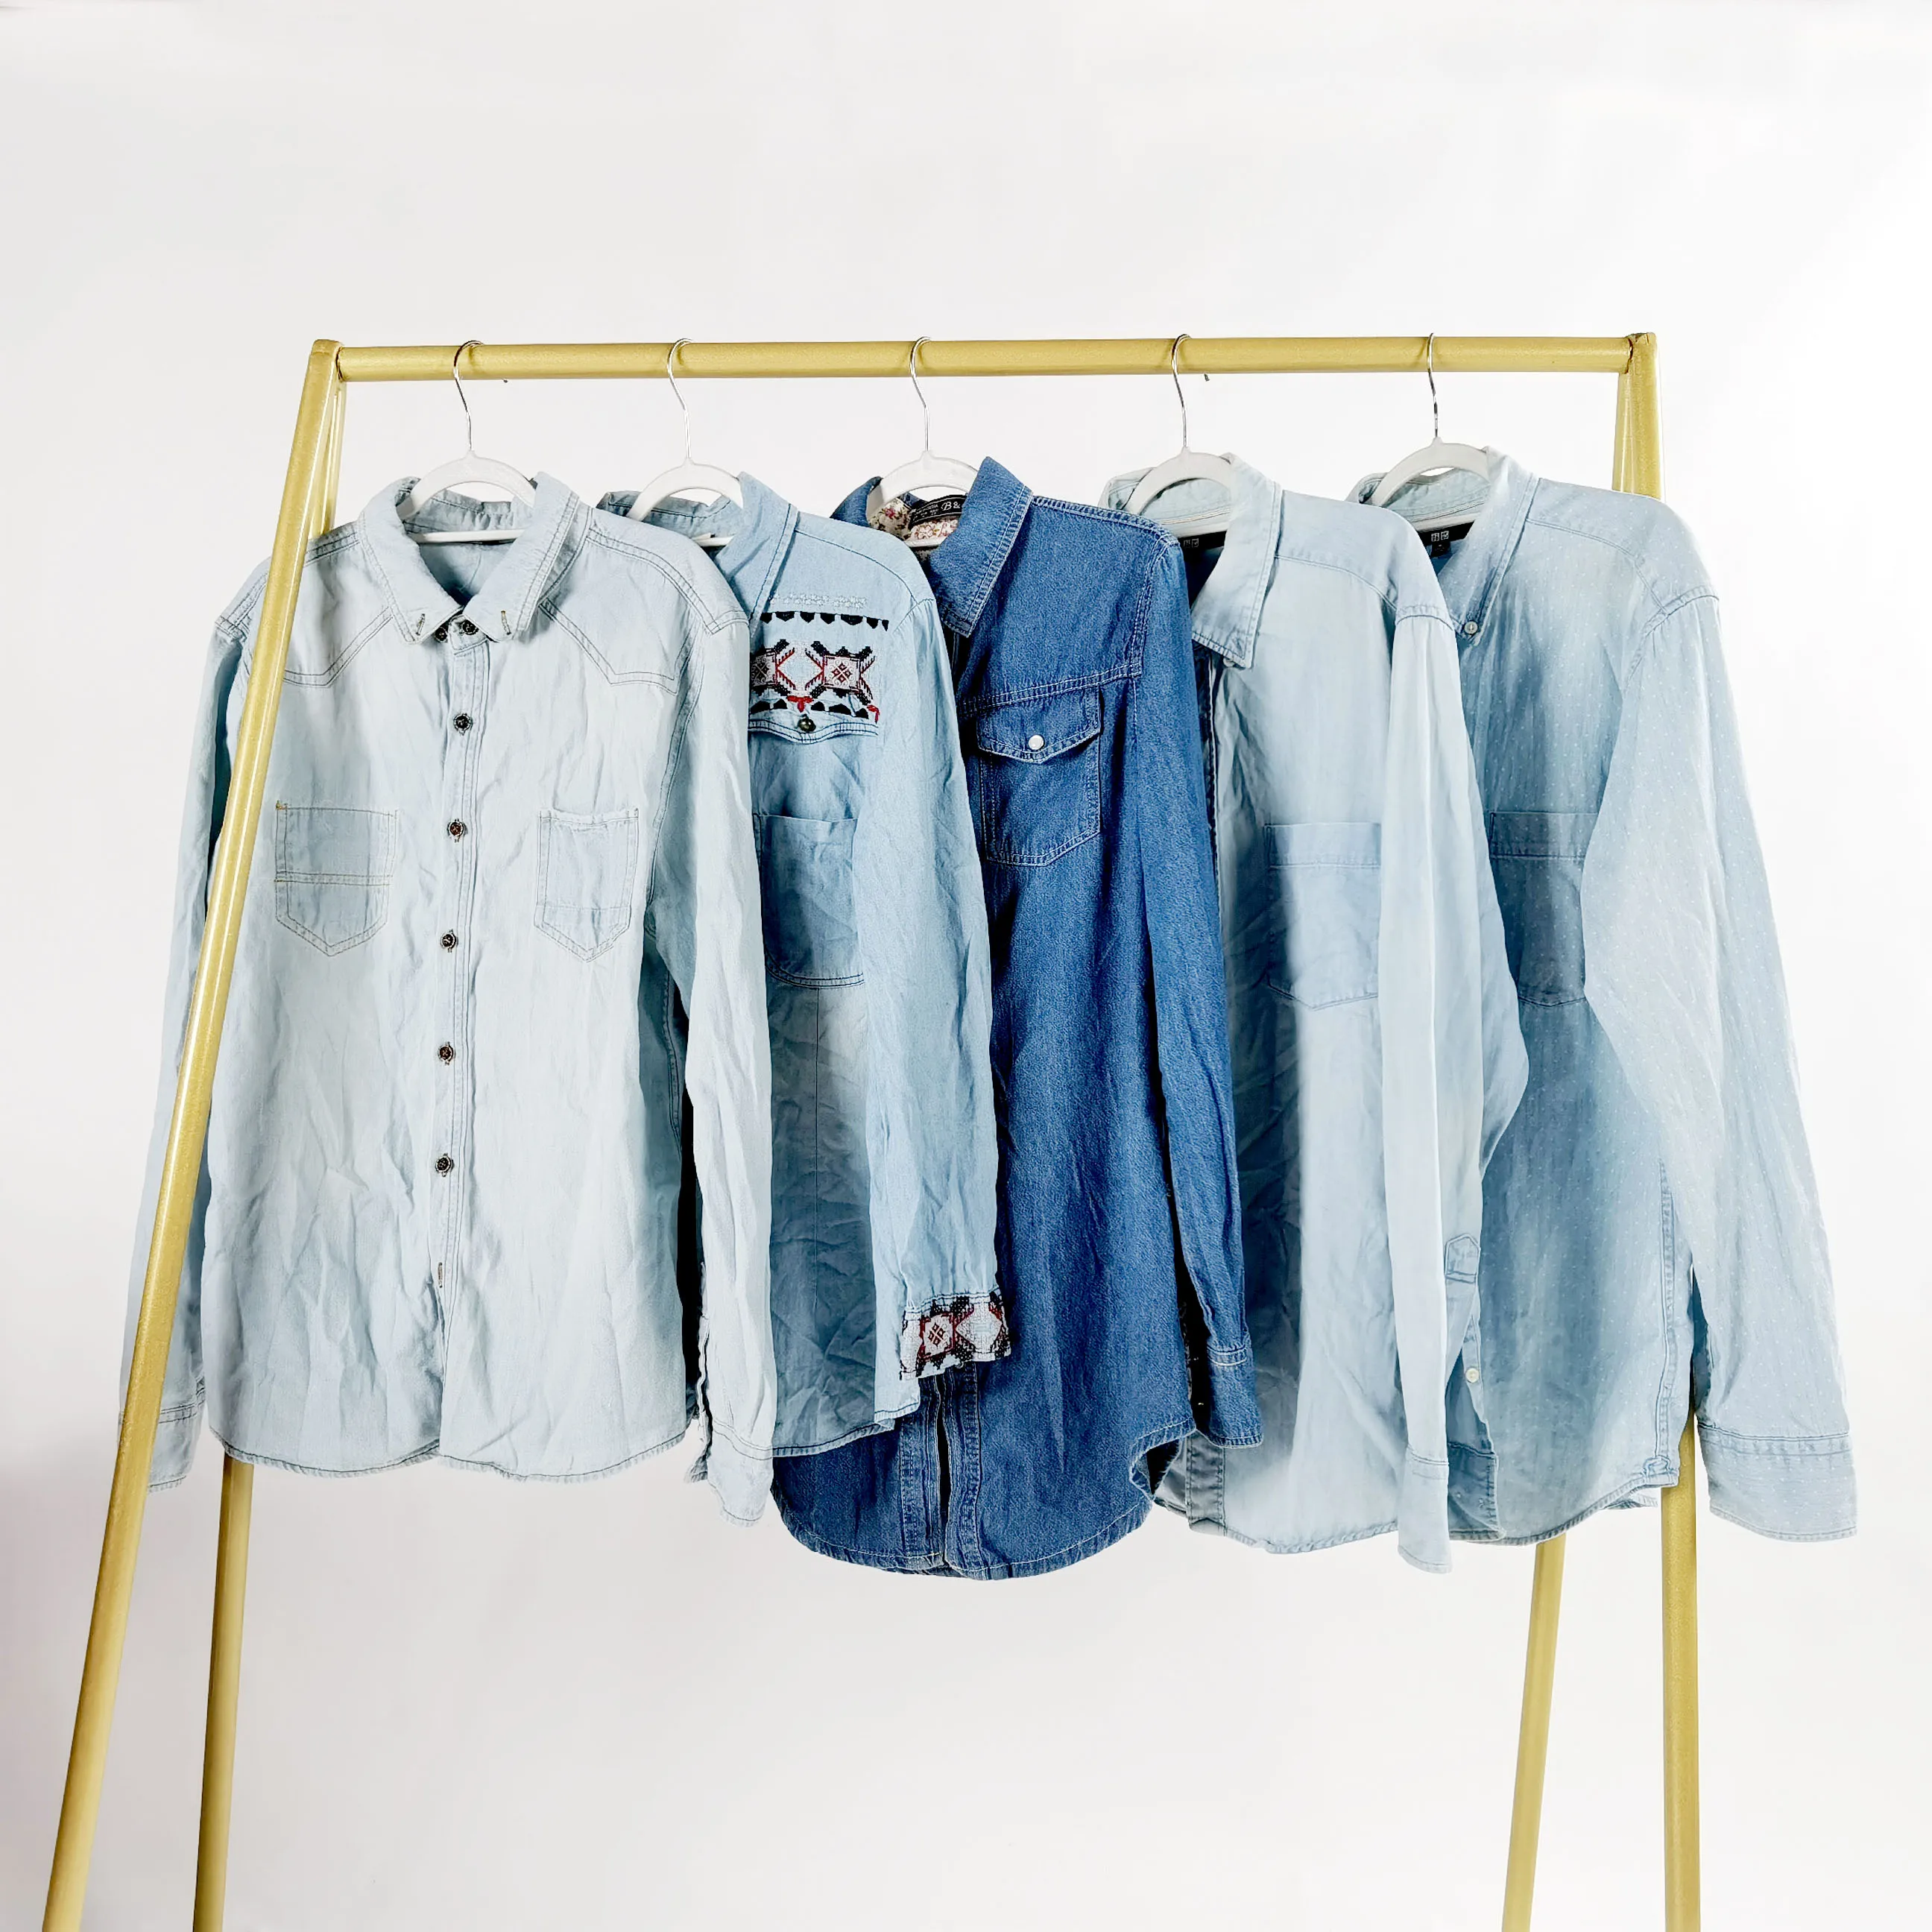 
High quality A Grade Jean Shirt Used Clothes 45 kgs per Bale 